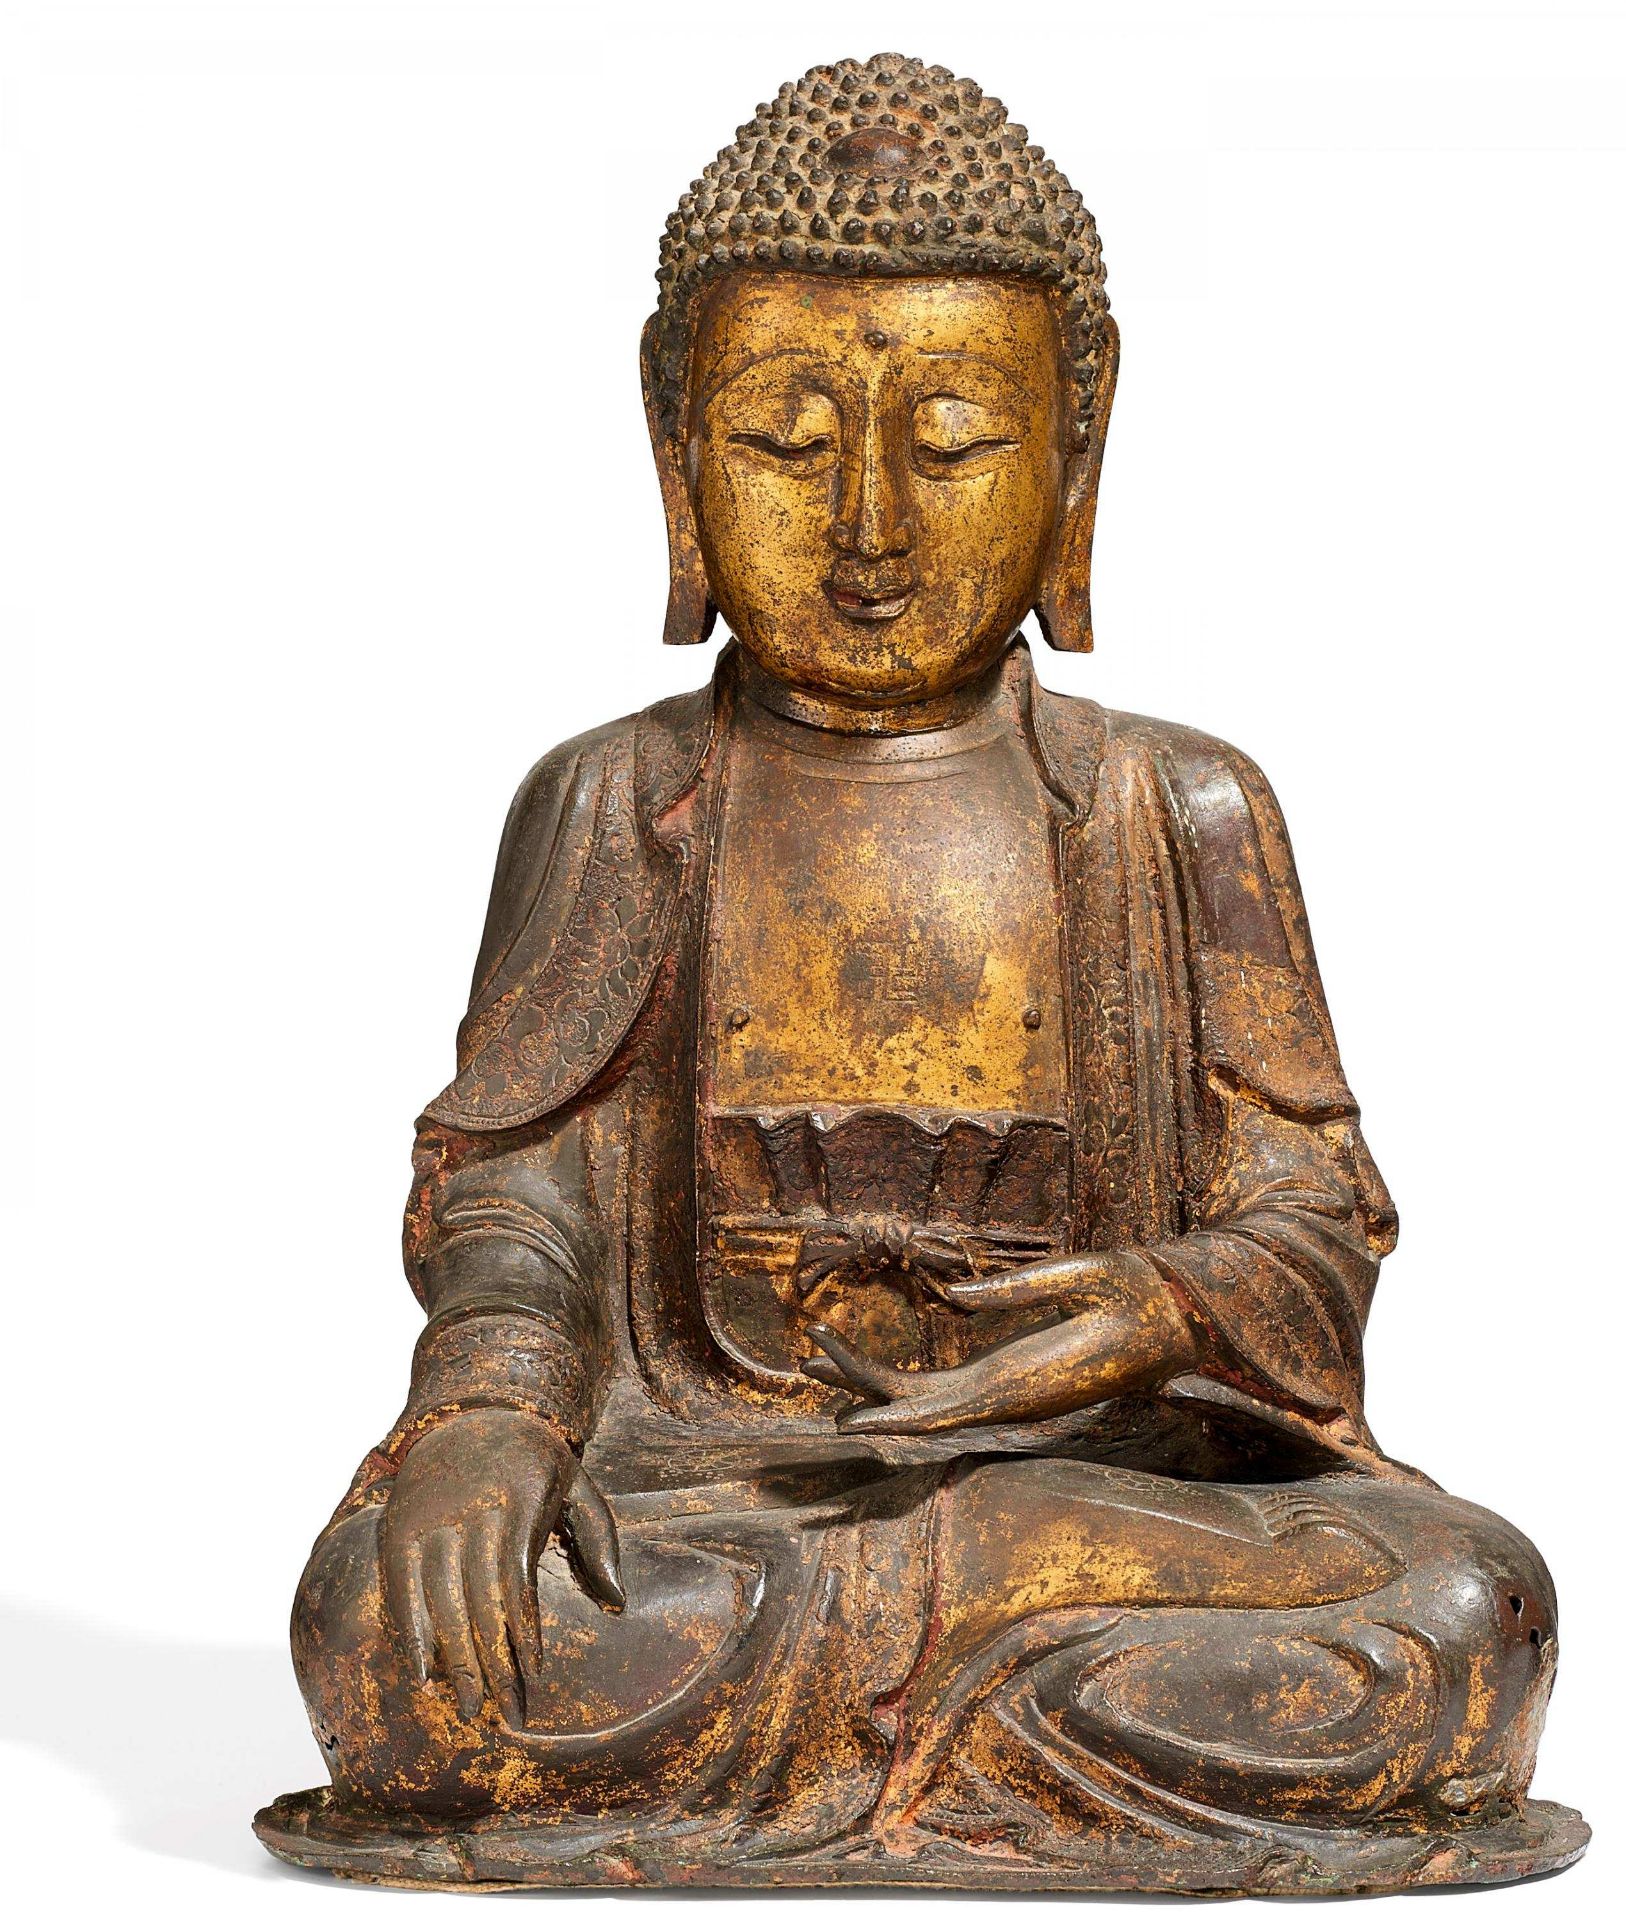 BUDDHA SHAKYAMUNI. China. Qing dynasty. 17th c. Bronze with black lacquer, gilding and traces of